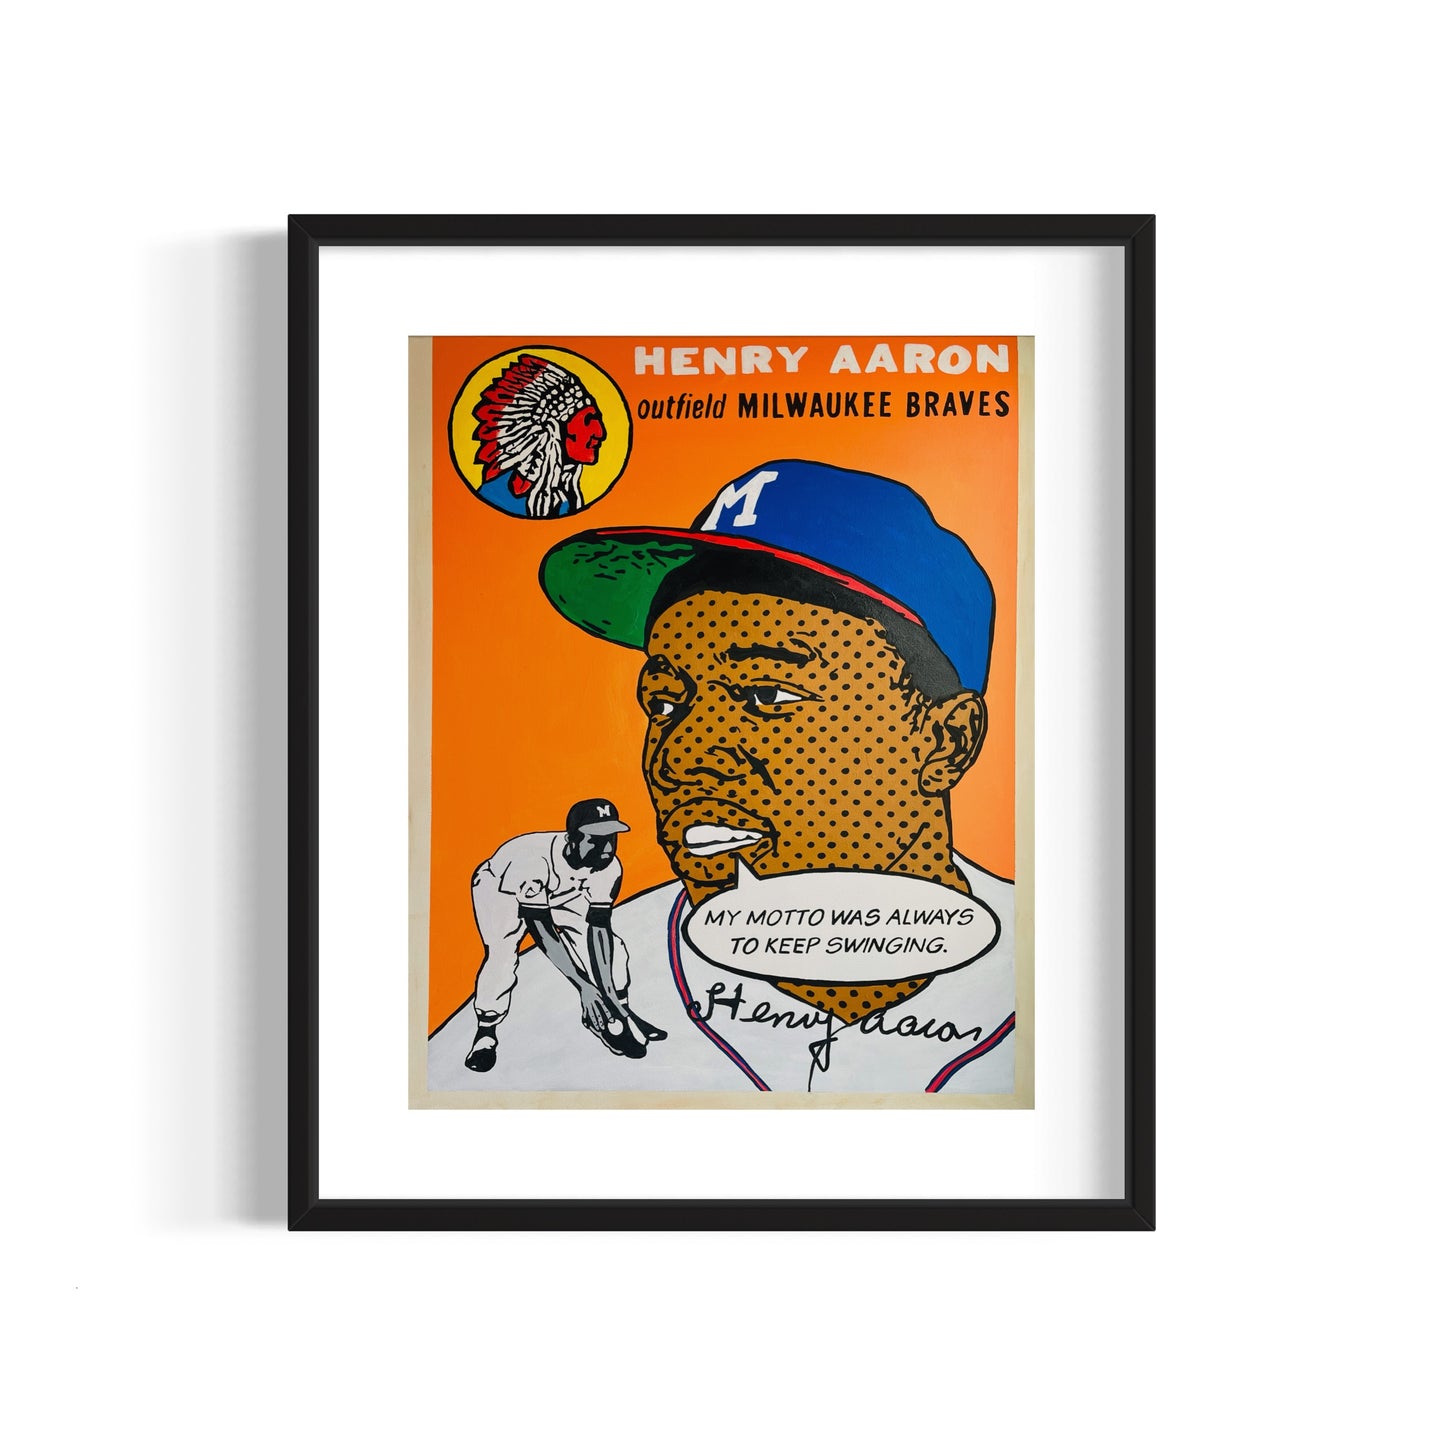 Henry Aaron 1954 “Holy Grails” Series, 2023 Giclee Print